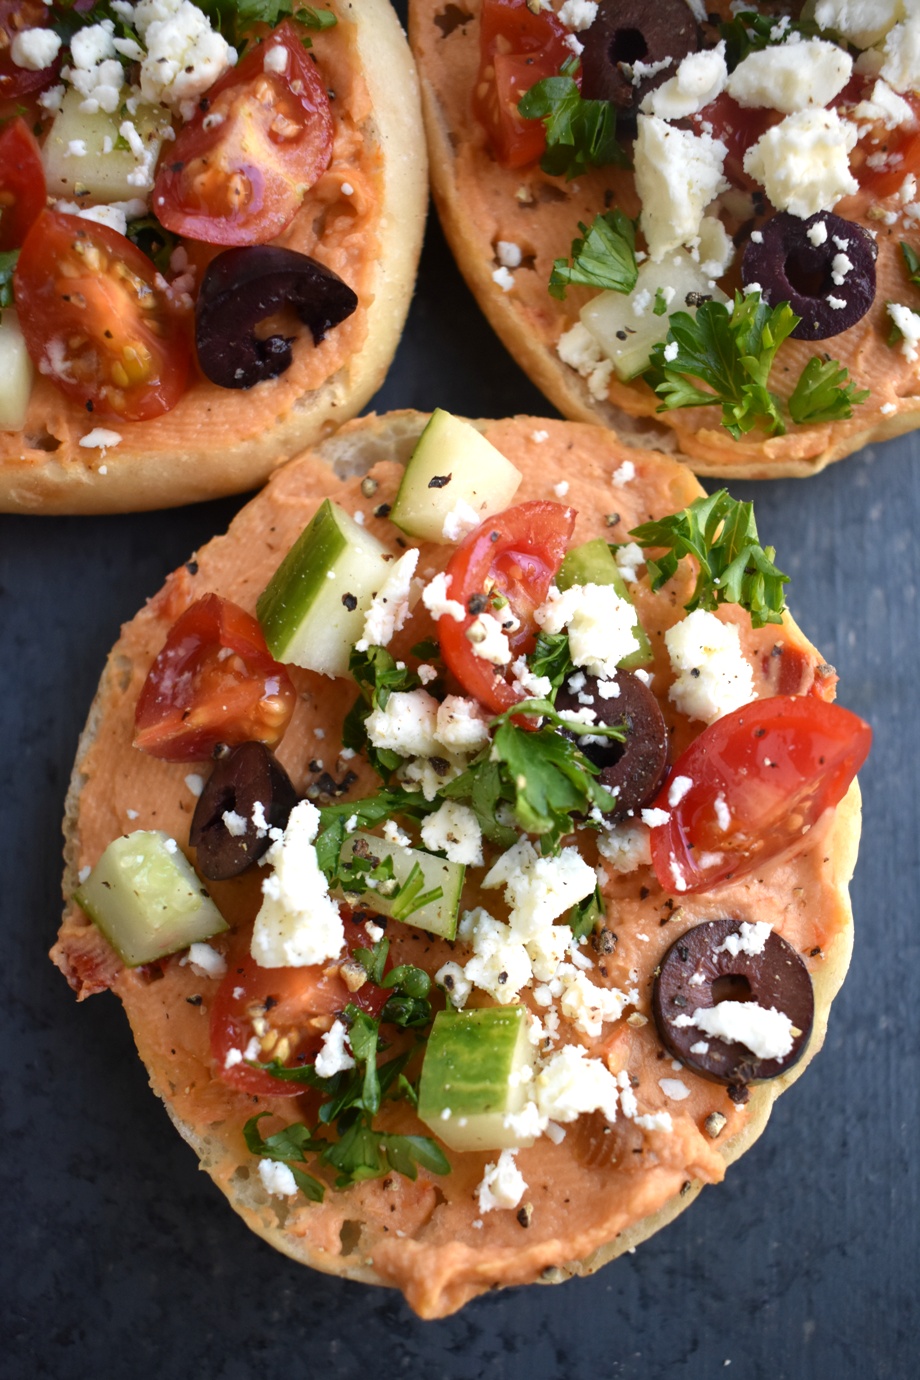 Mediterranean Hummus Bites are loaded with red pepper hummus, kalamata olives, tomatoes, cucumber and feta cheese on a toasted English muffin for an easy appetizer ready in 10 minutes that everyone will love! www.nutritionistreviews.com #healthy #appetizer #cleaneating #holidays